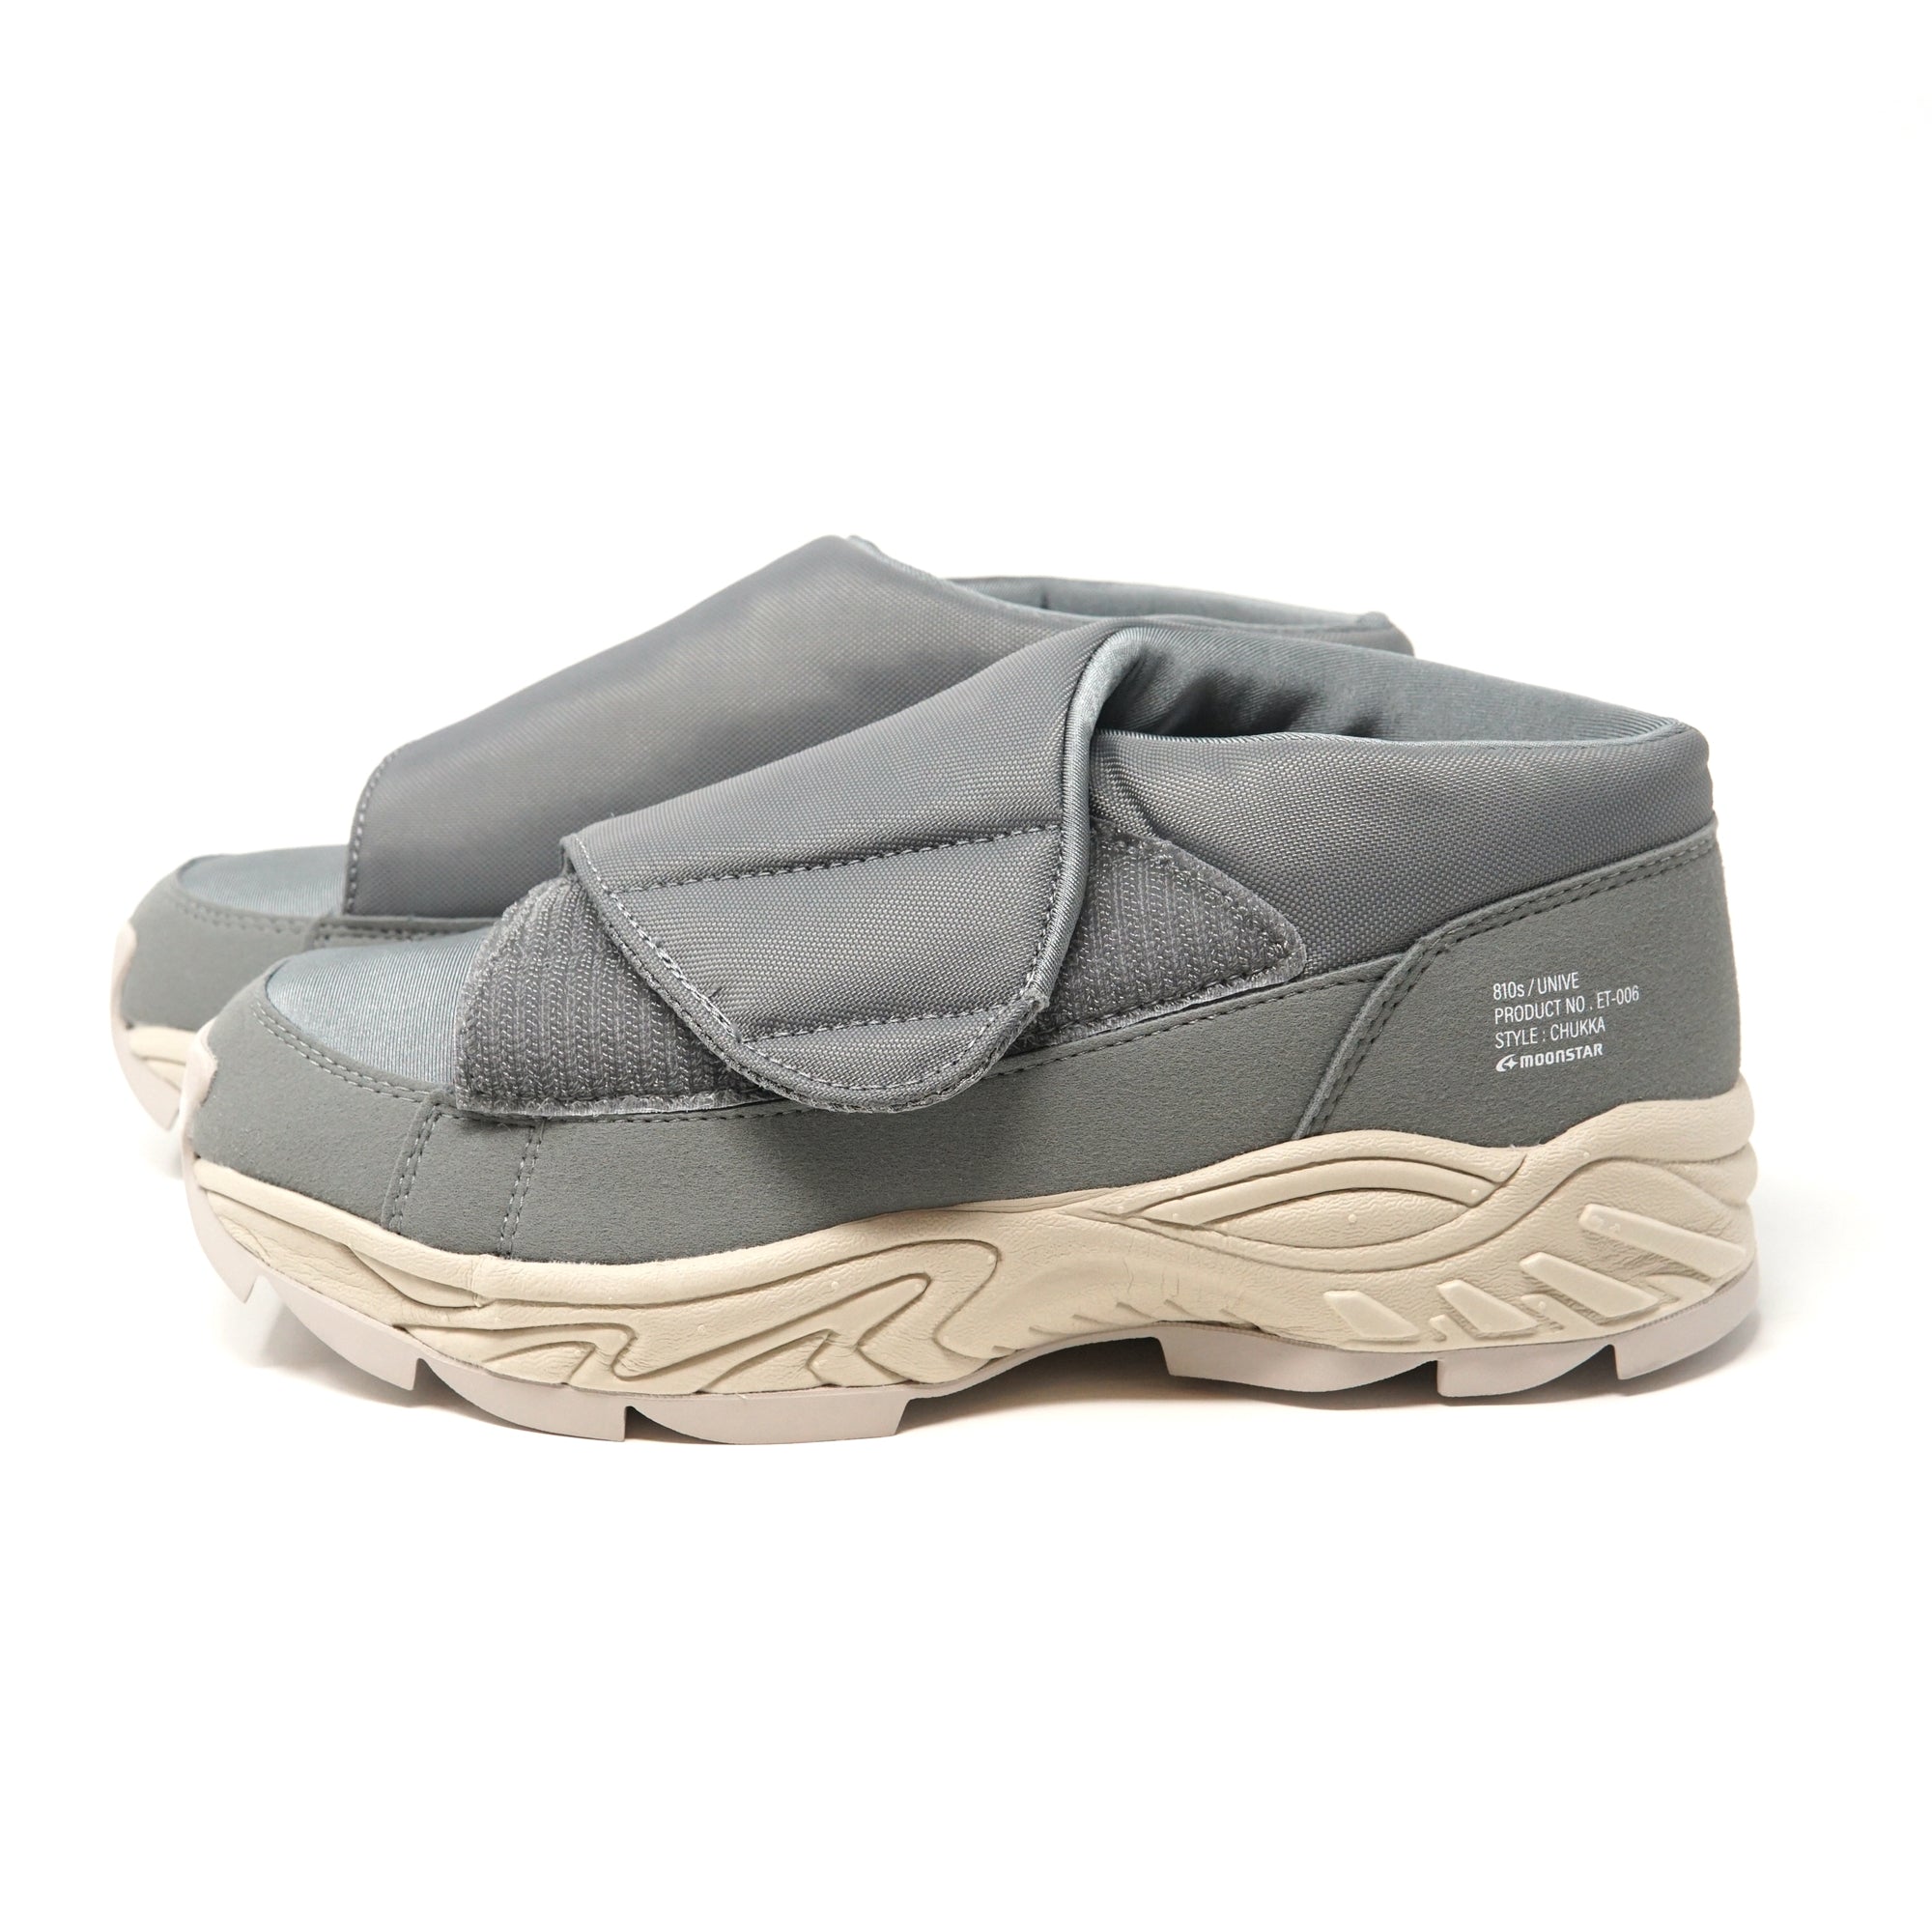 NO:ET006 | Name:UNIVE ユニーブ | Color:Gray【810S_エイトテンス